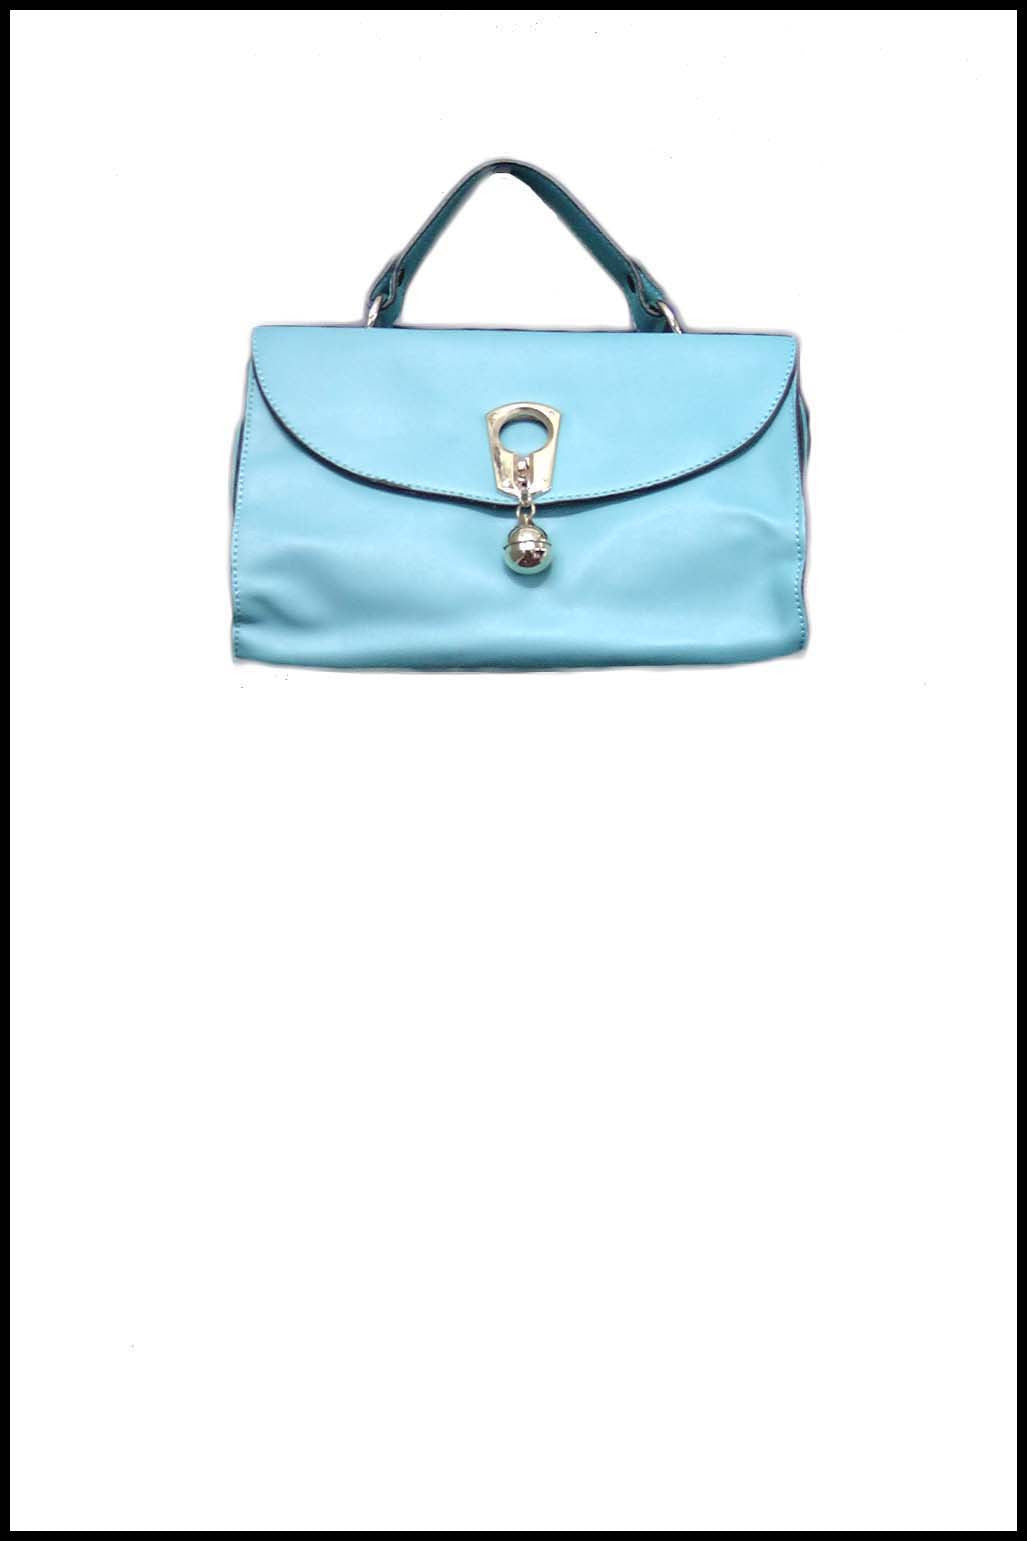 Petite Fold-over Tote with Gold Ball Clasp and Detailing